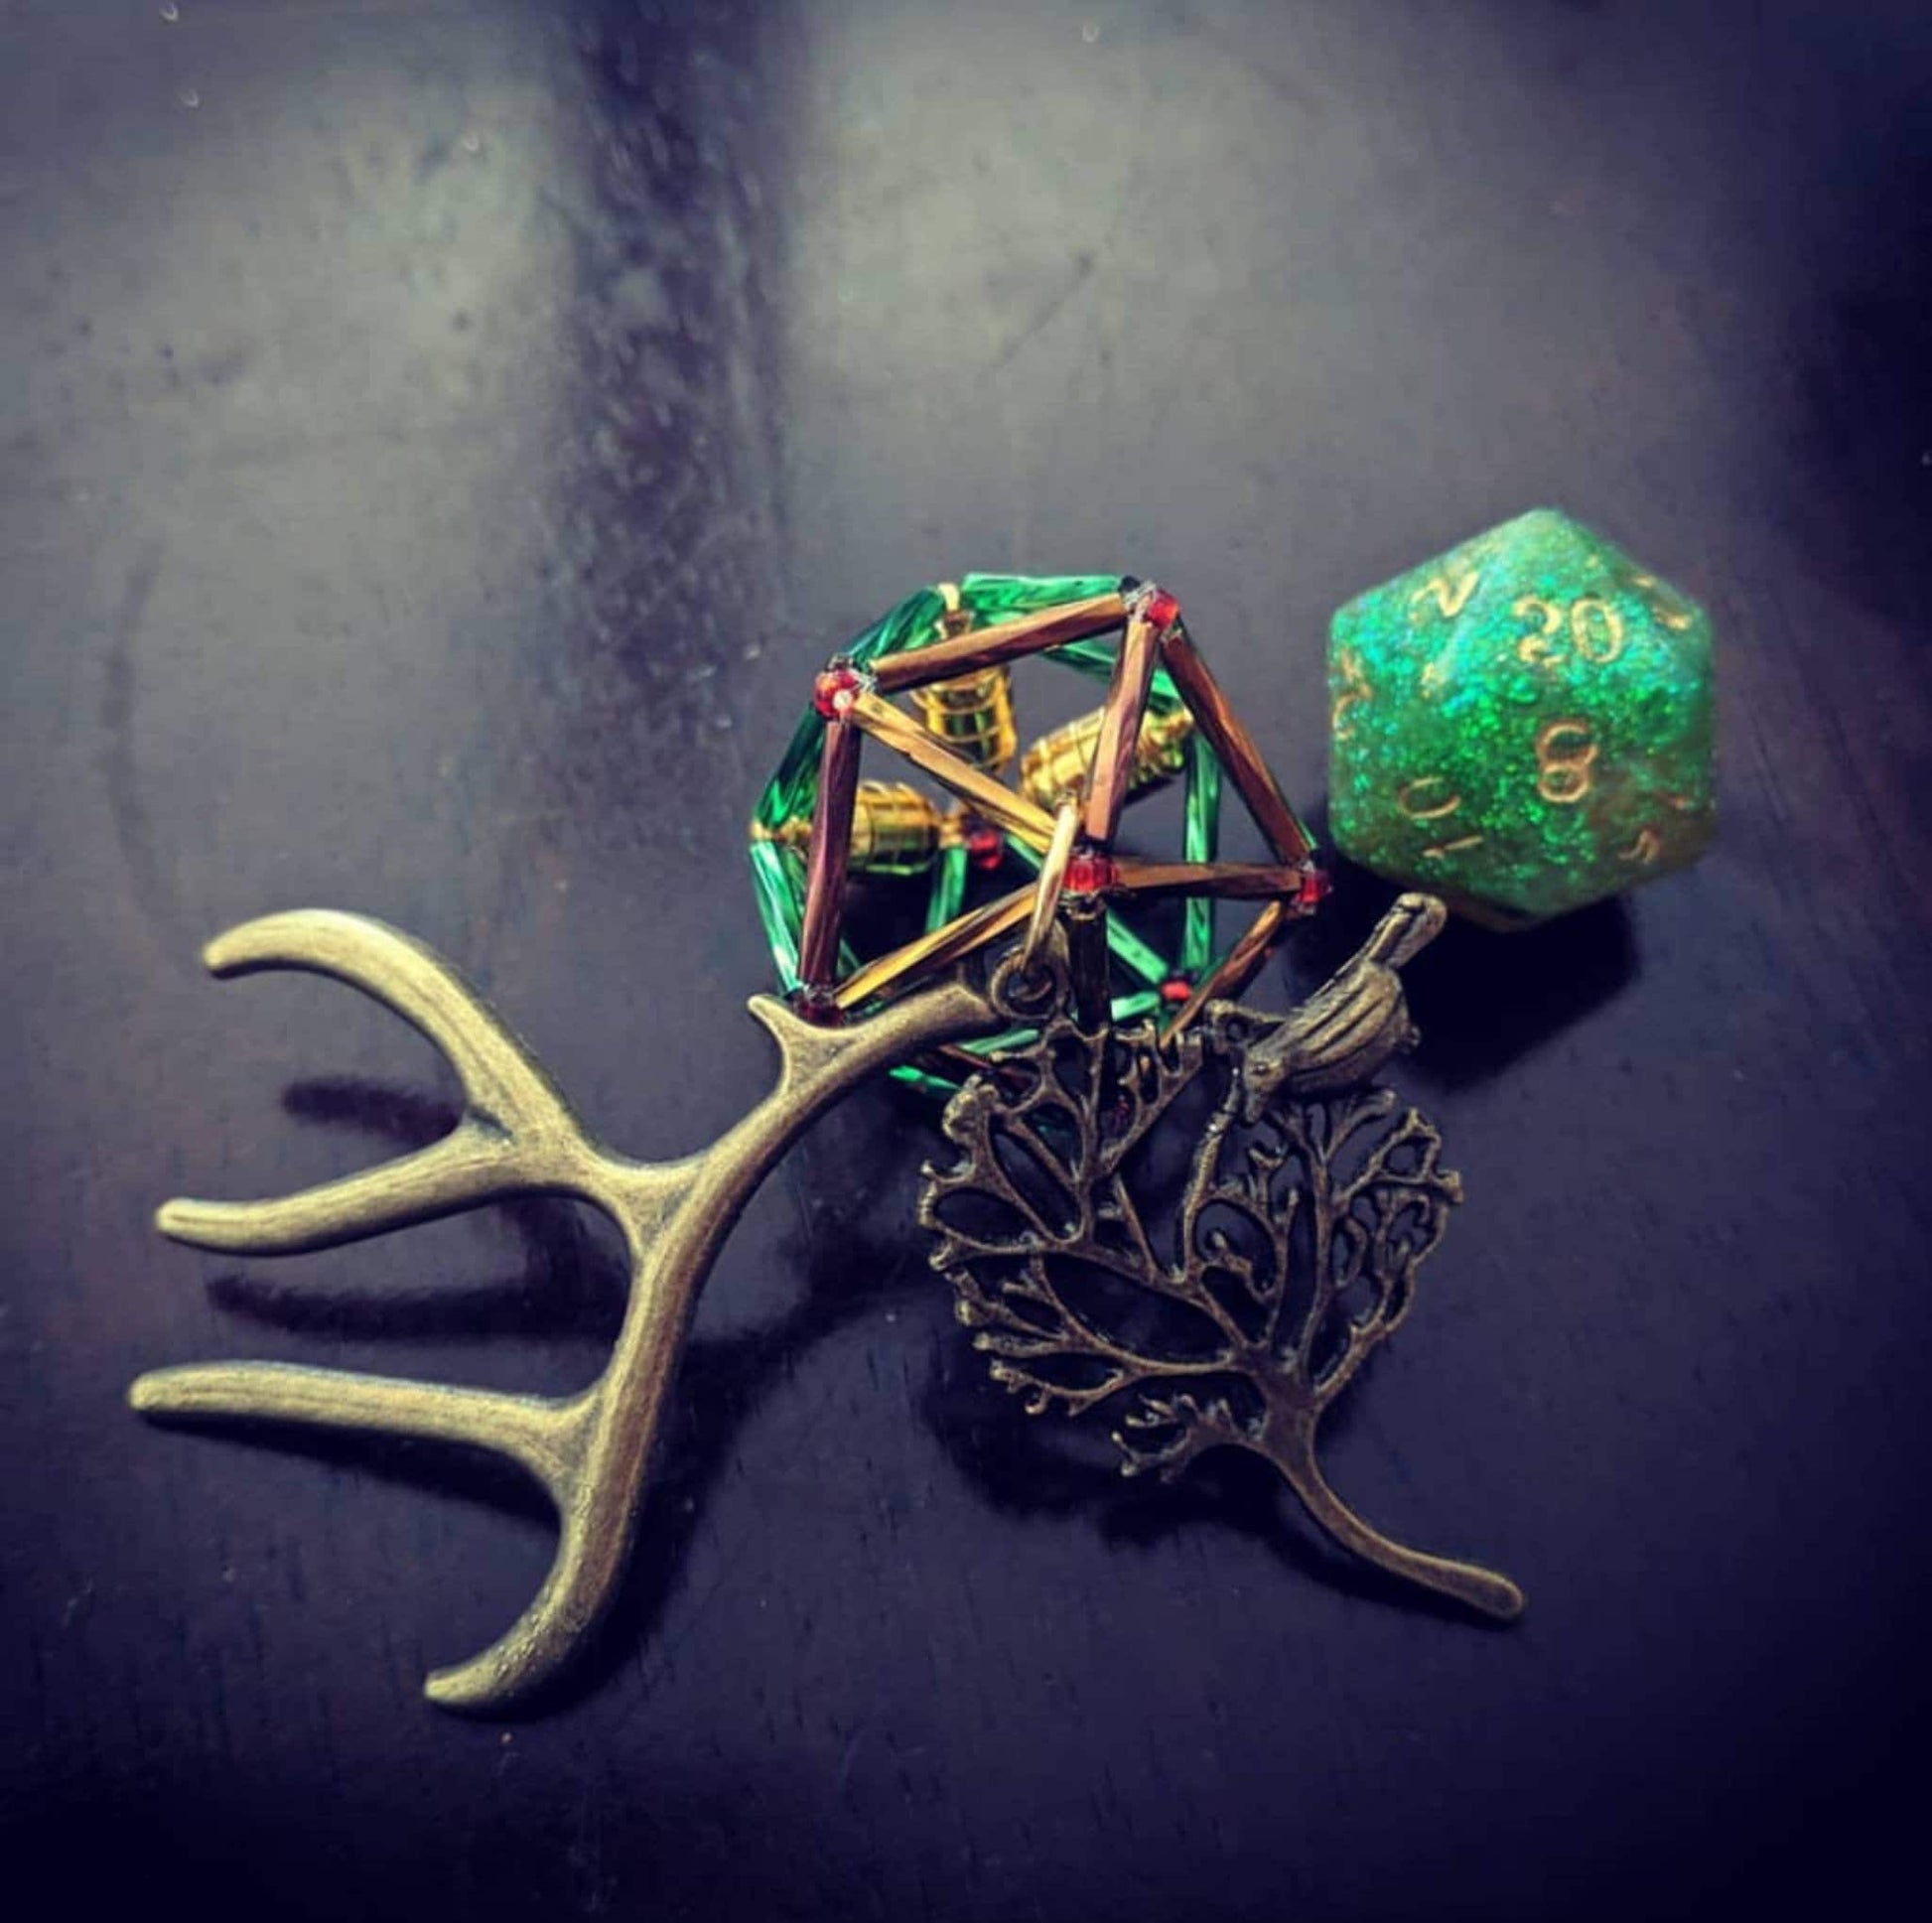 Keyleth necklace: green and reddish brown cage with two charms. Bronze antler and tree with birds charm.